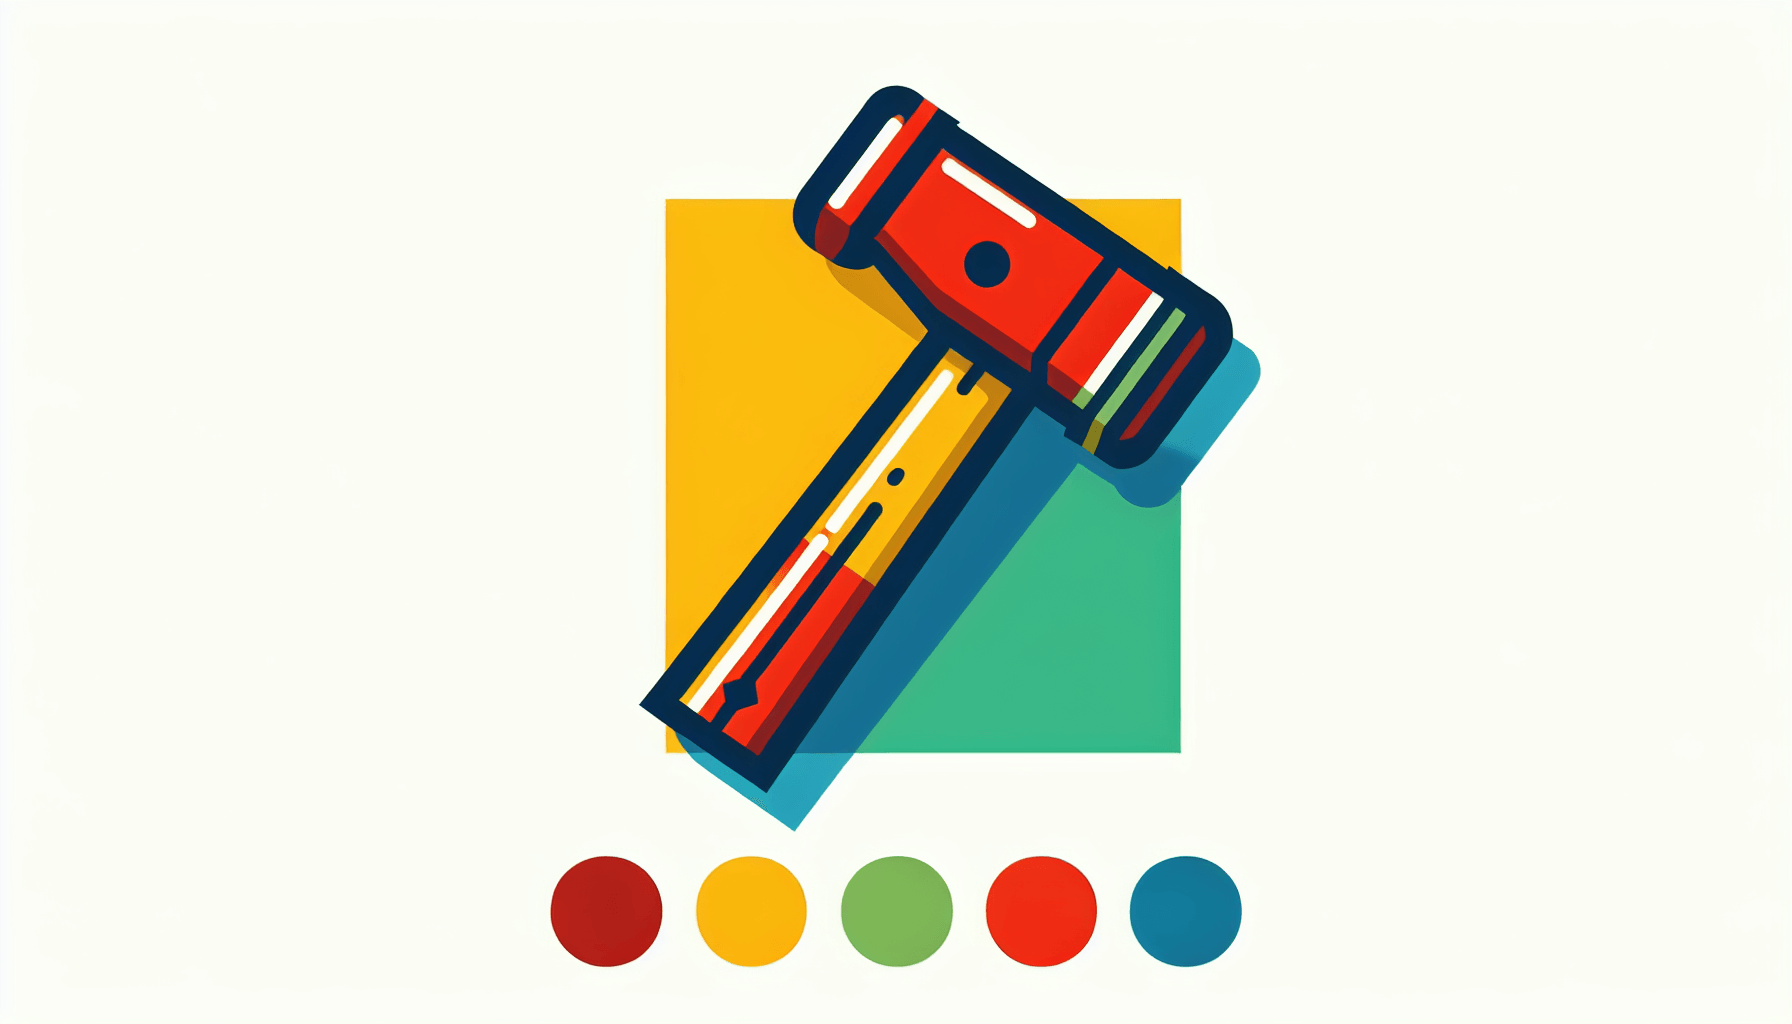 Hammer in flat illustration style and white background, red #f47574, green #88c7a8, yellow #fcc44b, and blue #645bc8 colors.